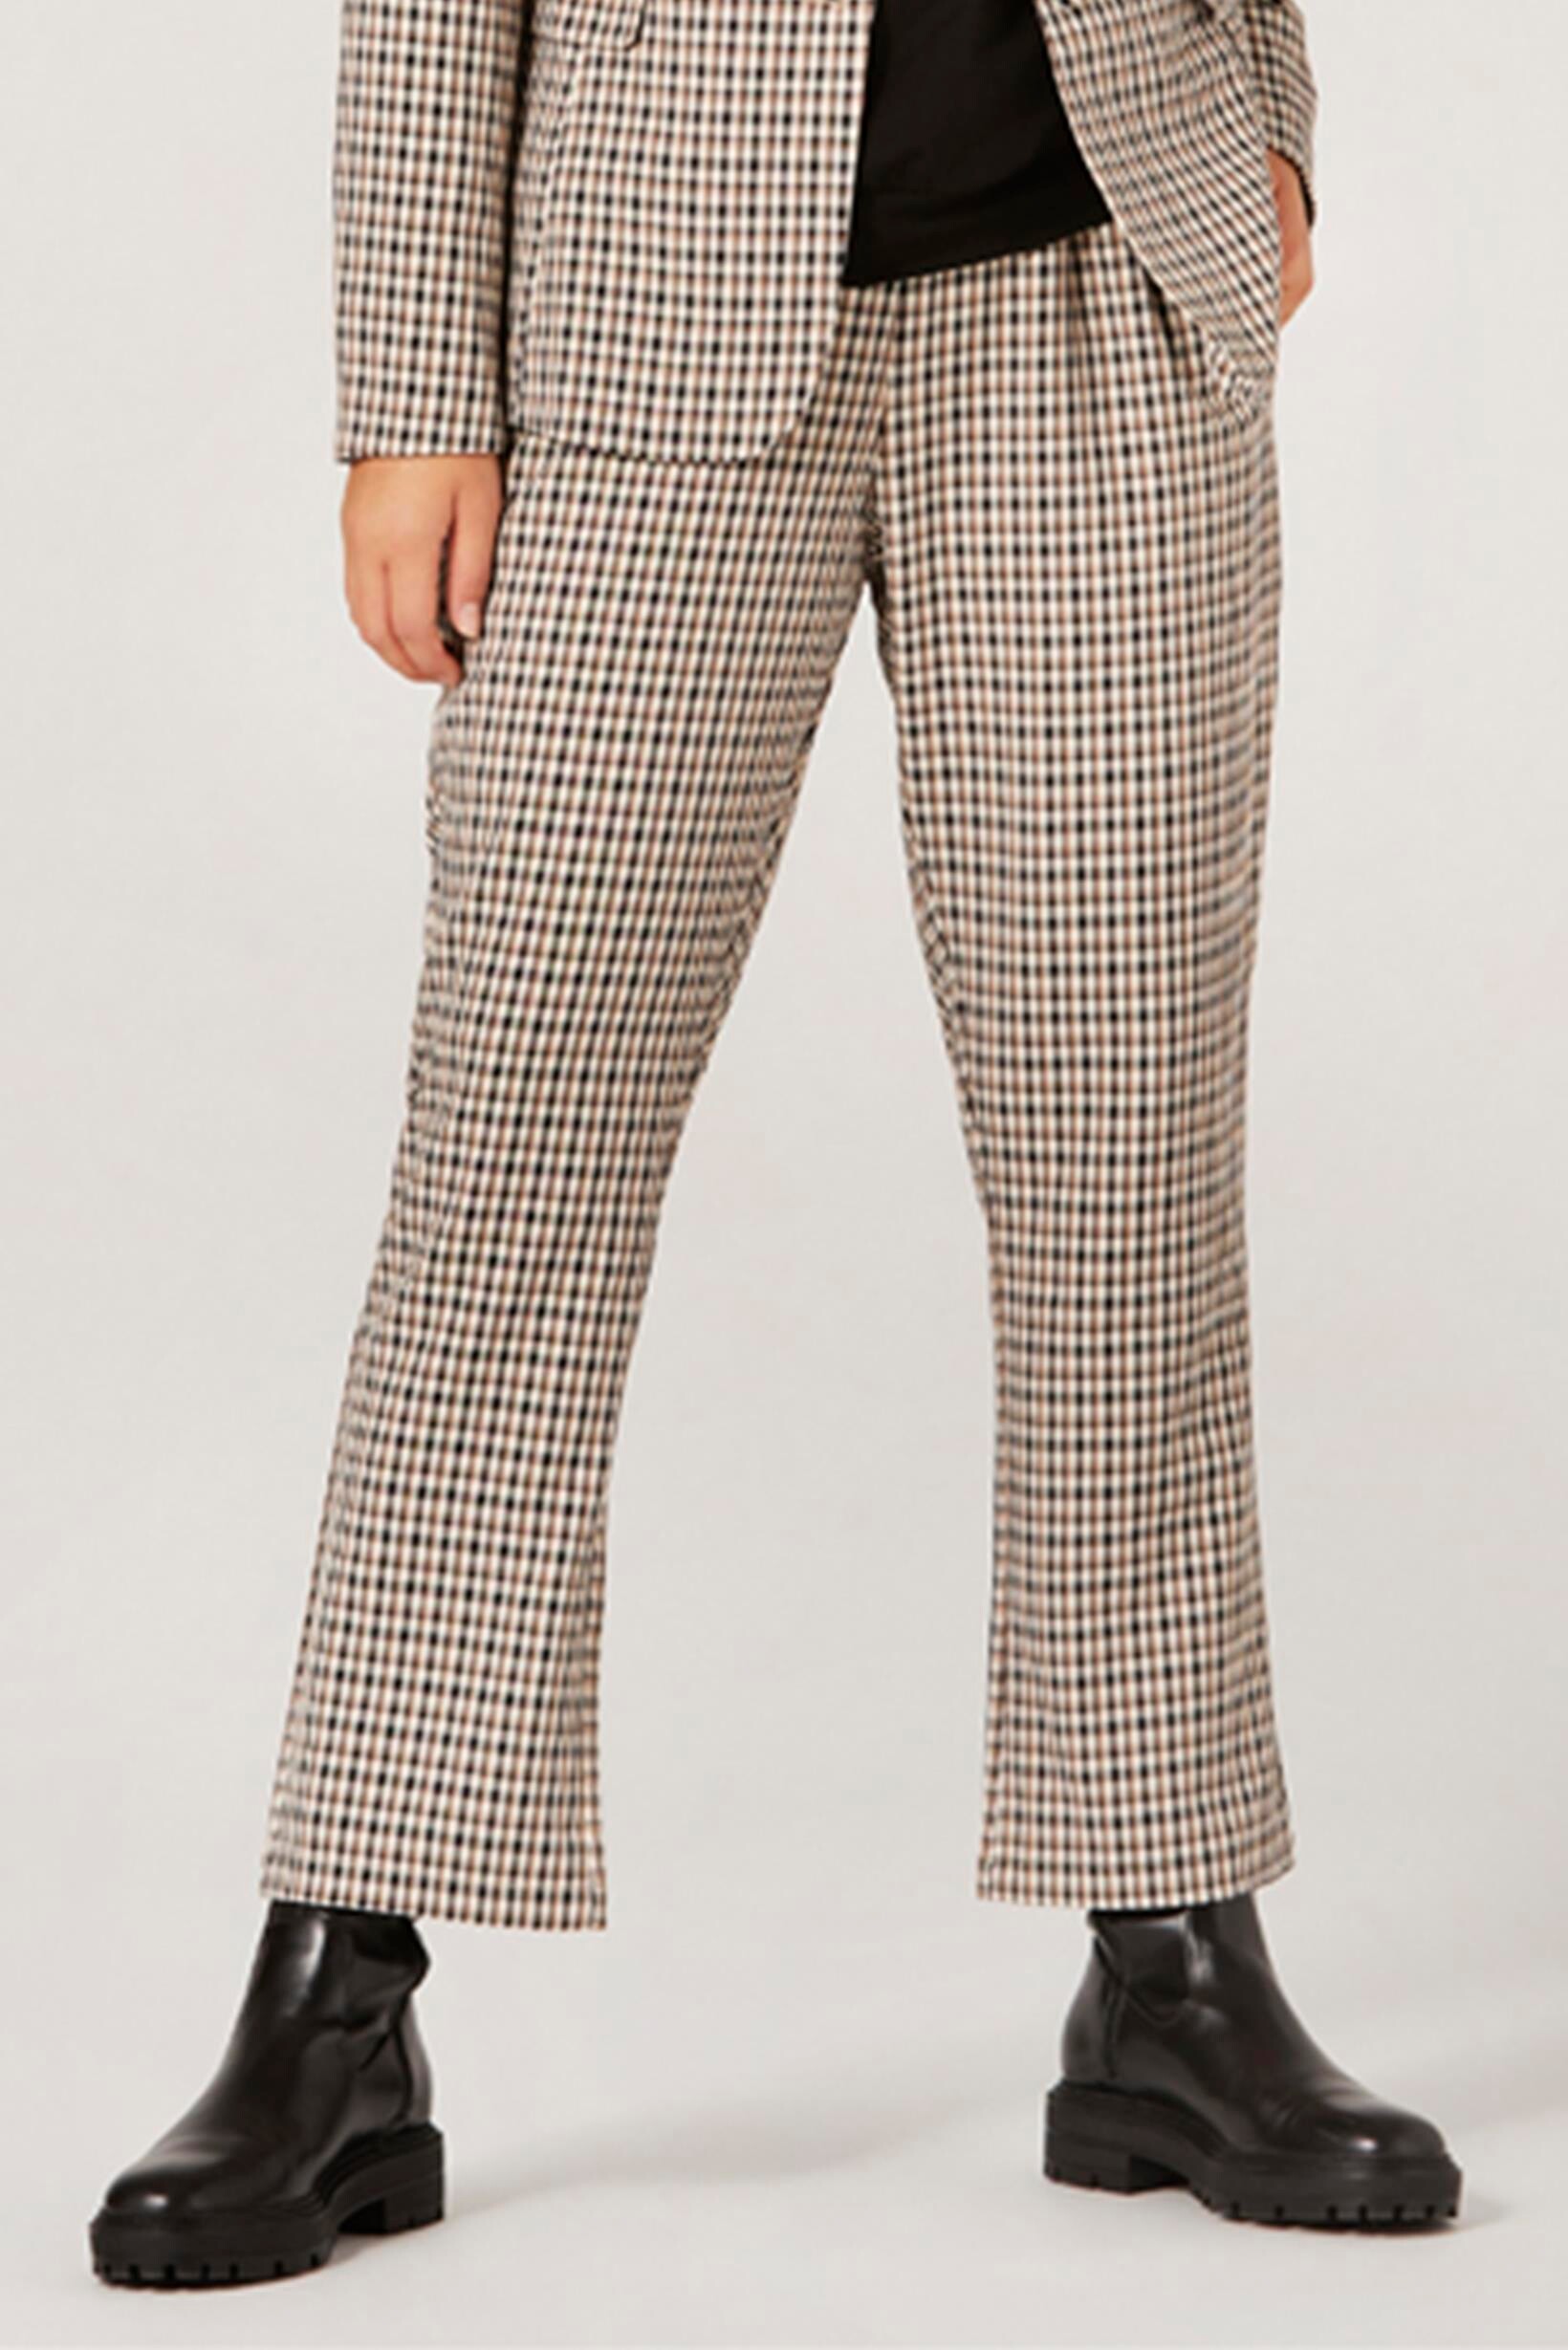 Details 67+ houndstooth trousers womens - in.cdgdbentre